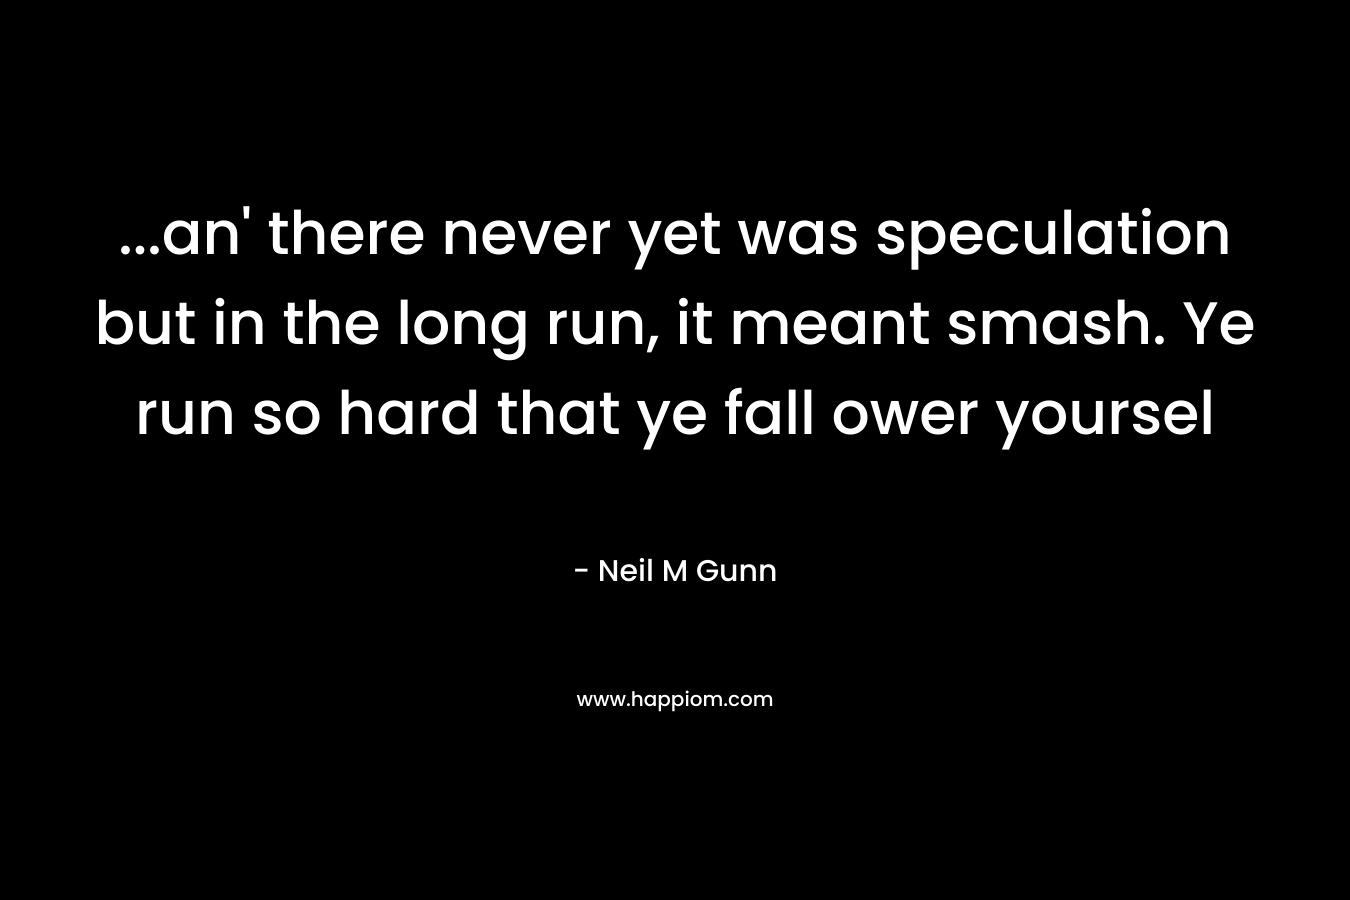 …an’ there never yet was speculation but in the long run, it meant smash. Ye run so hard that ye fall ower yoursel – Neil M Gunn